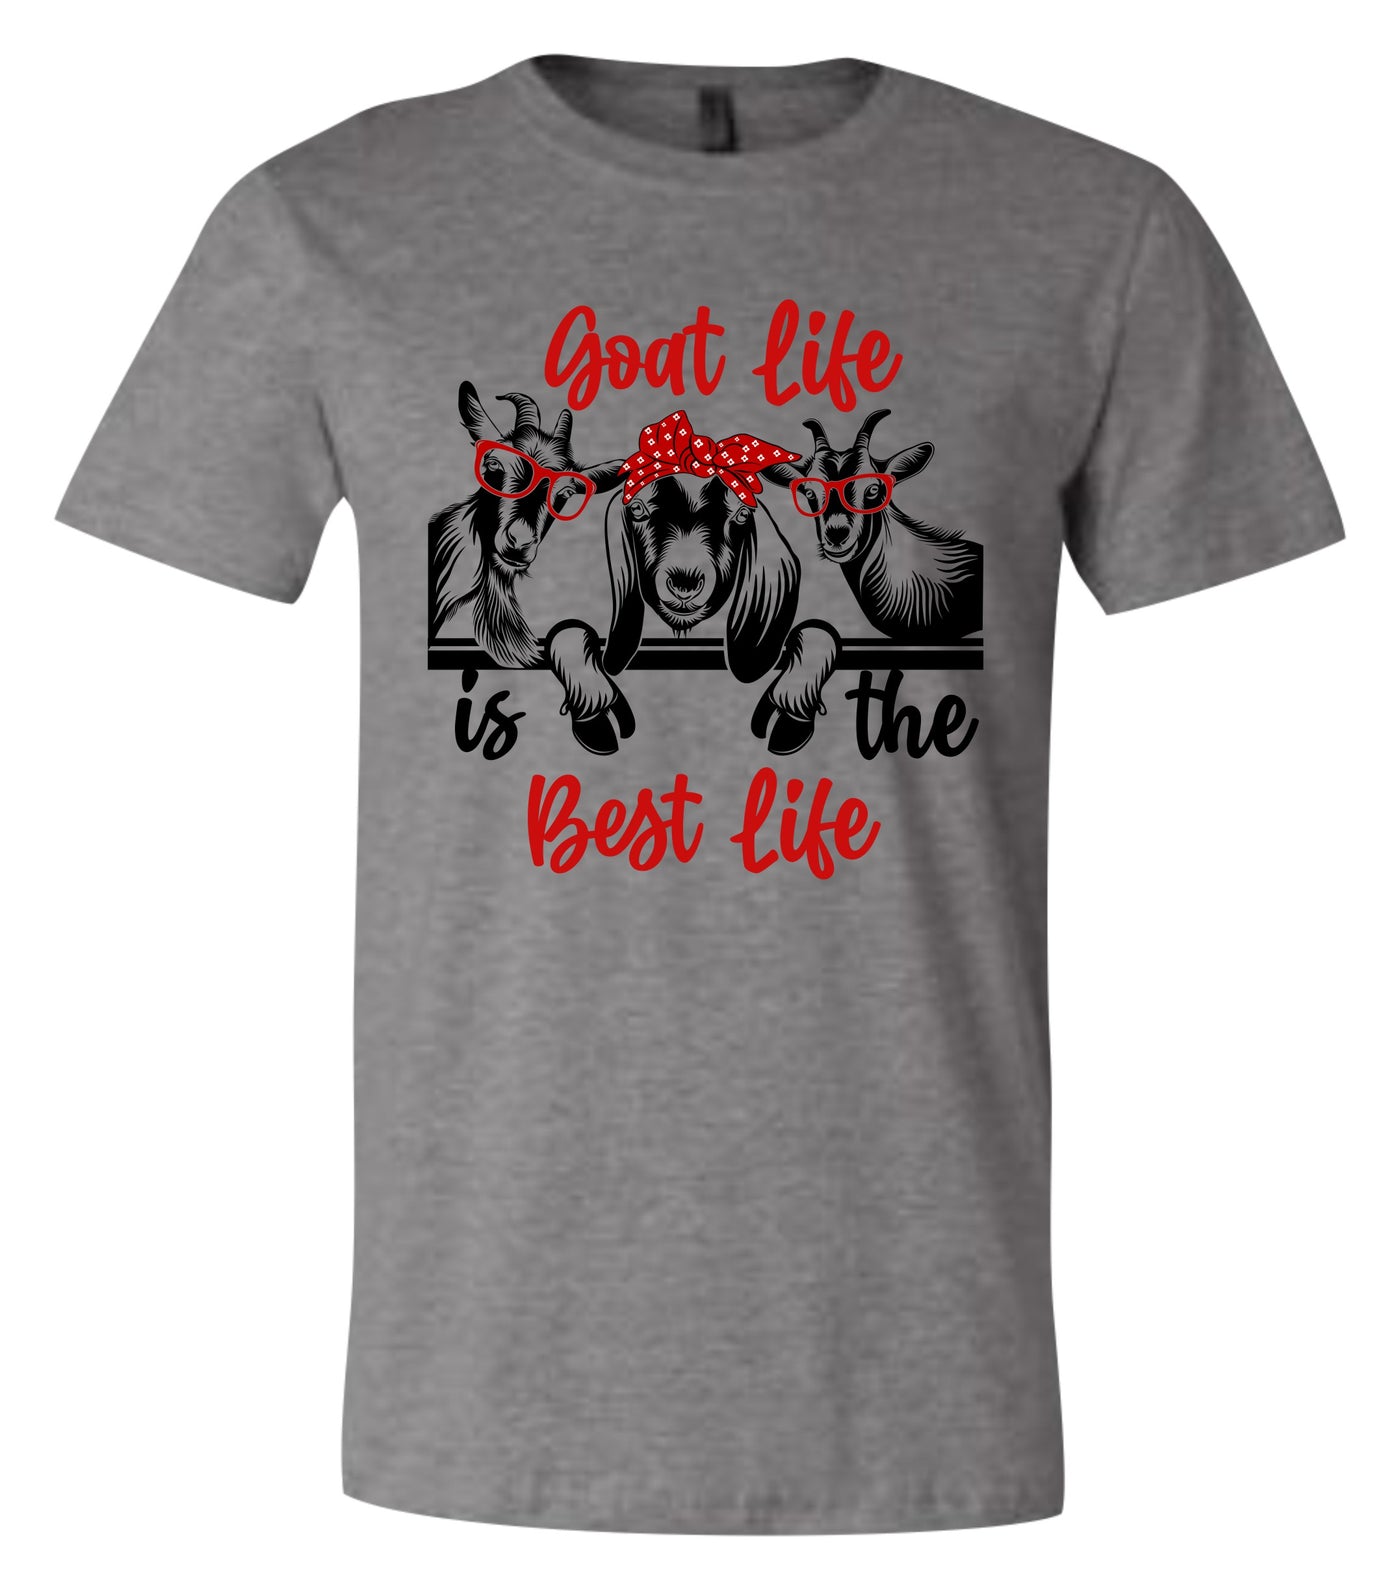 Animal Life is the Best Life Short Sleeve Graphic T-Shirt